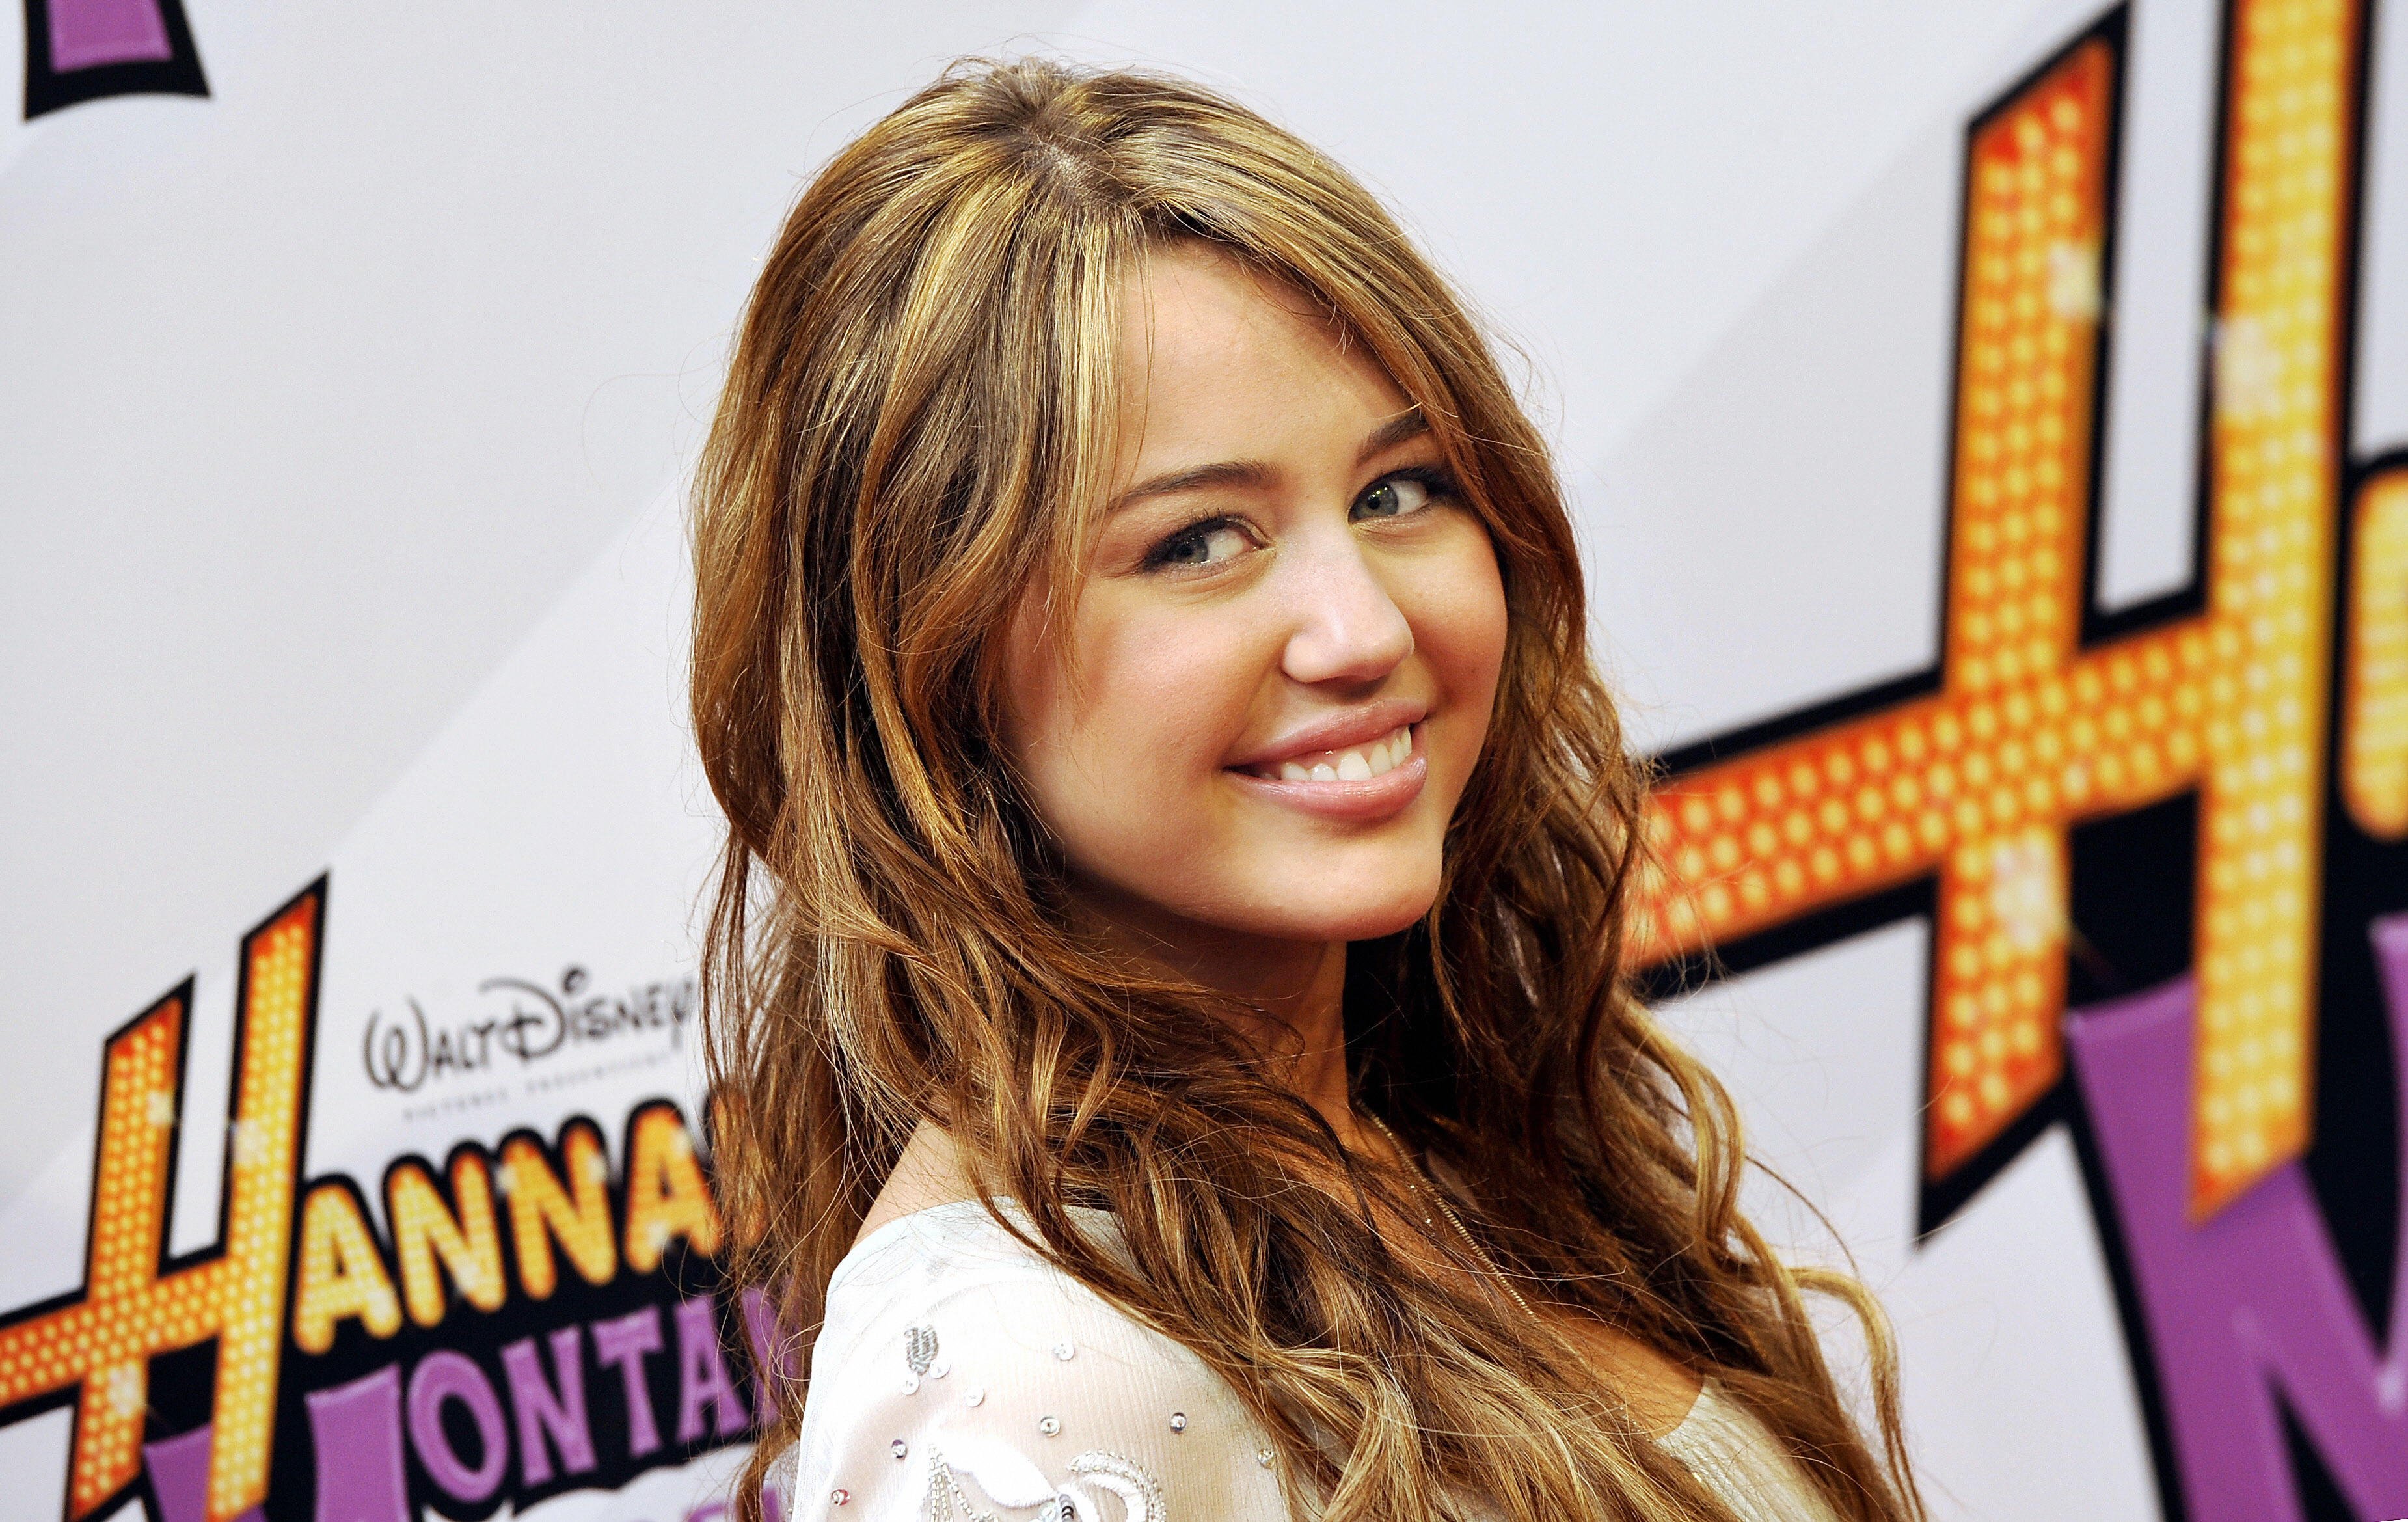 Miley Cyrus on the red carpet for the film 'Hannah Montana - The Movie' on April 25, 2009.